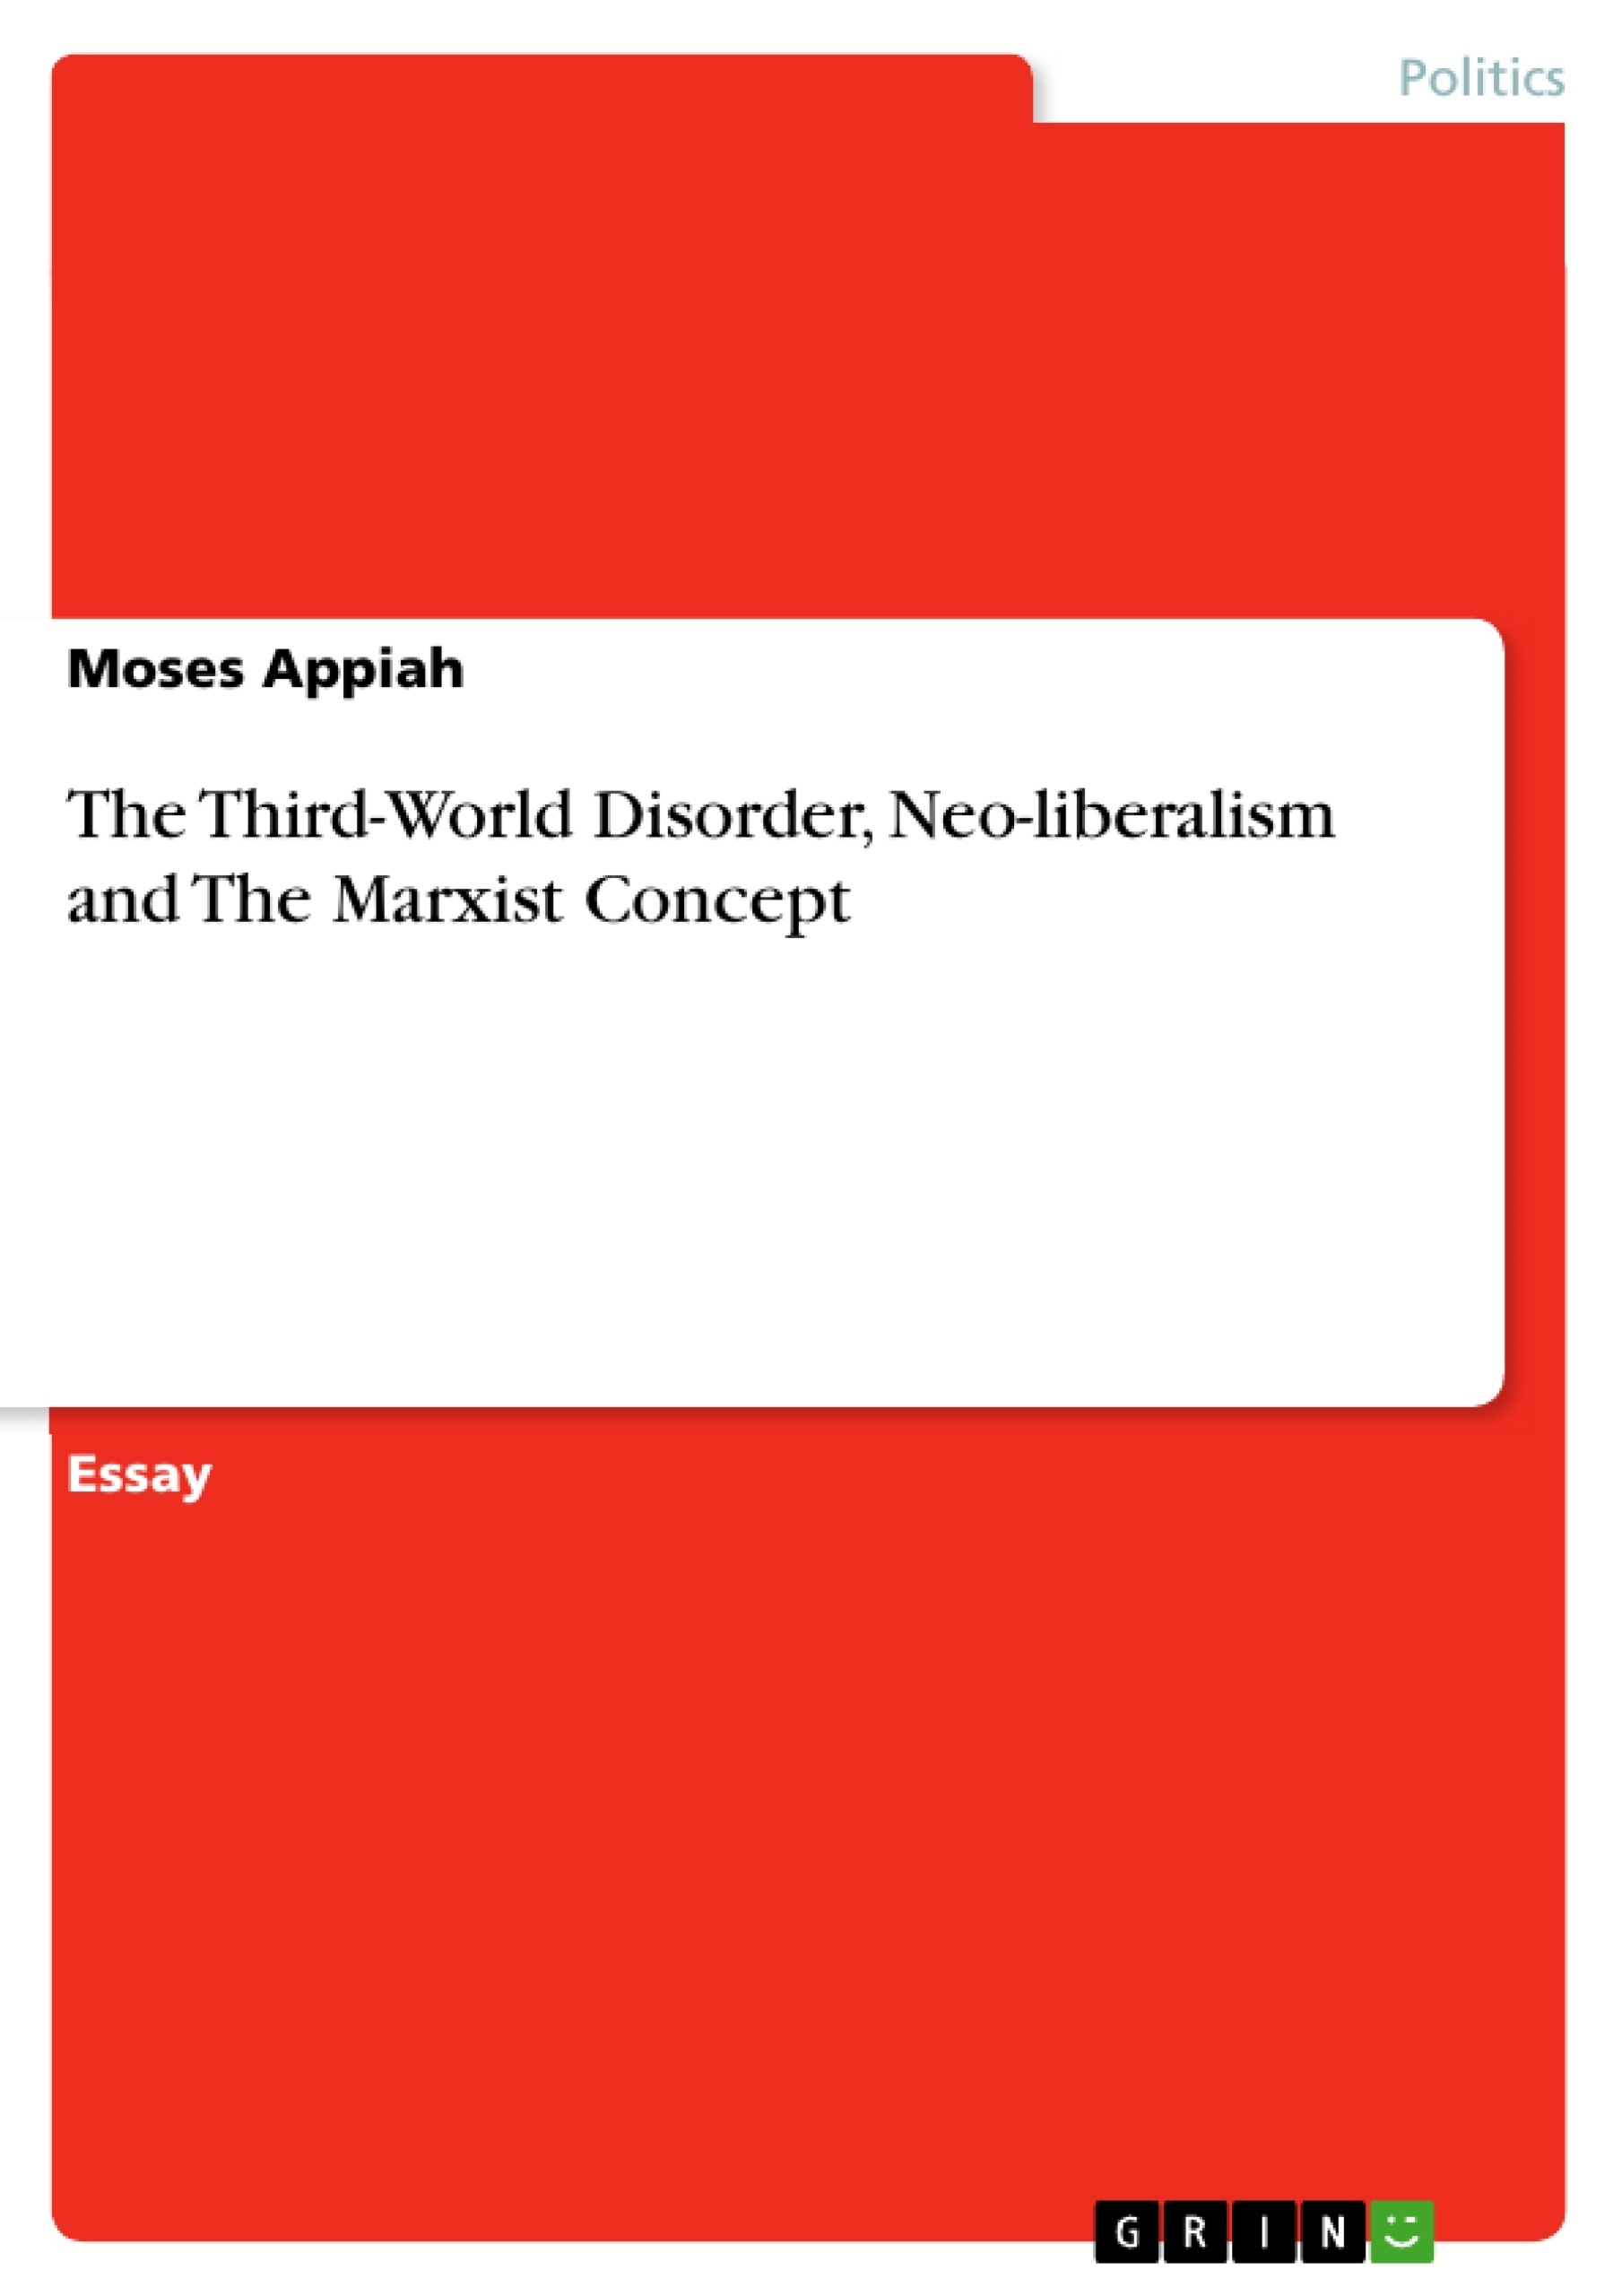 Title: The Third-World Disorder, Neo-liberalism and The Marxist Concept